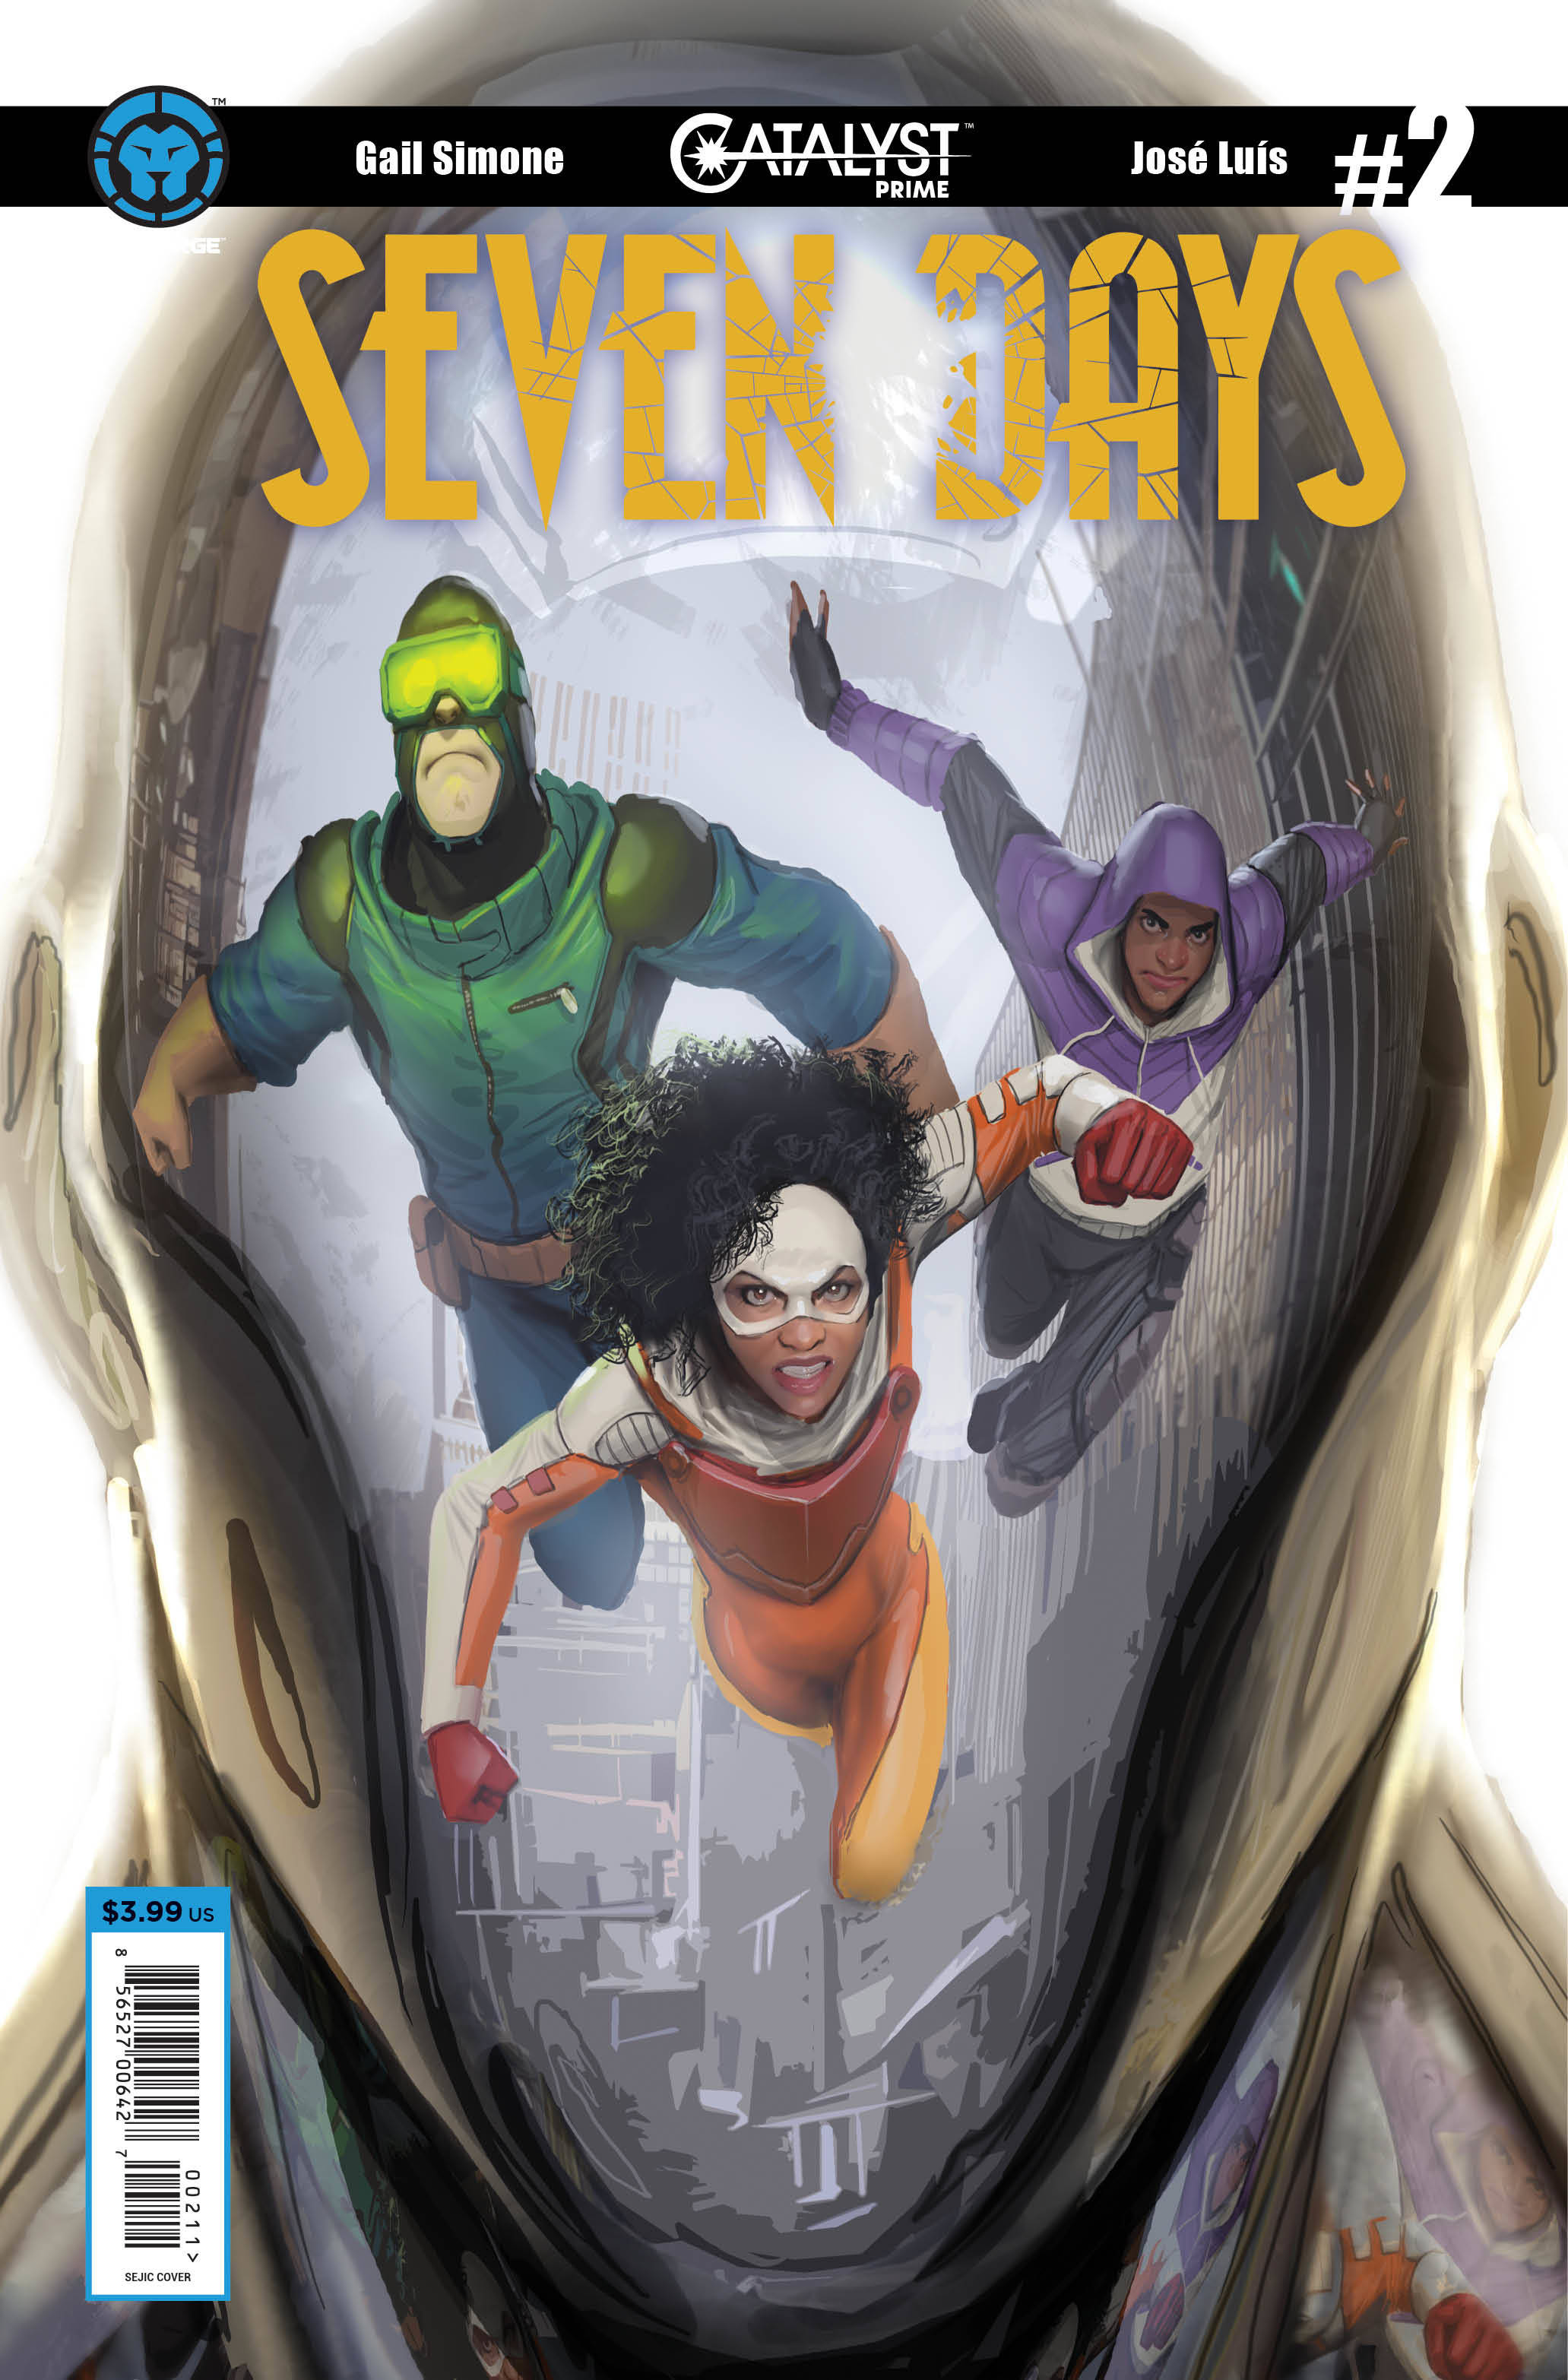 Catalyst Prime Seven Days #2 Main Cover (Of 7)